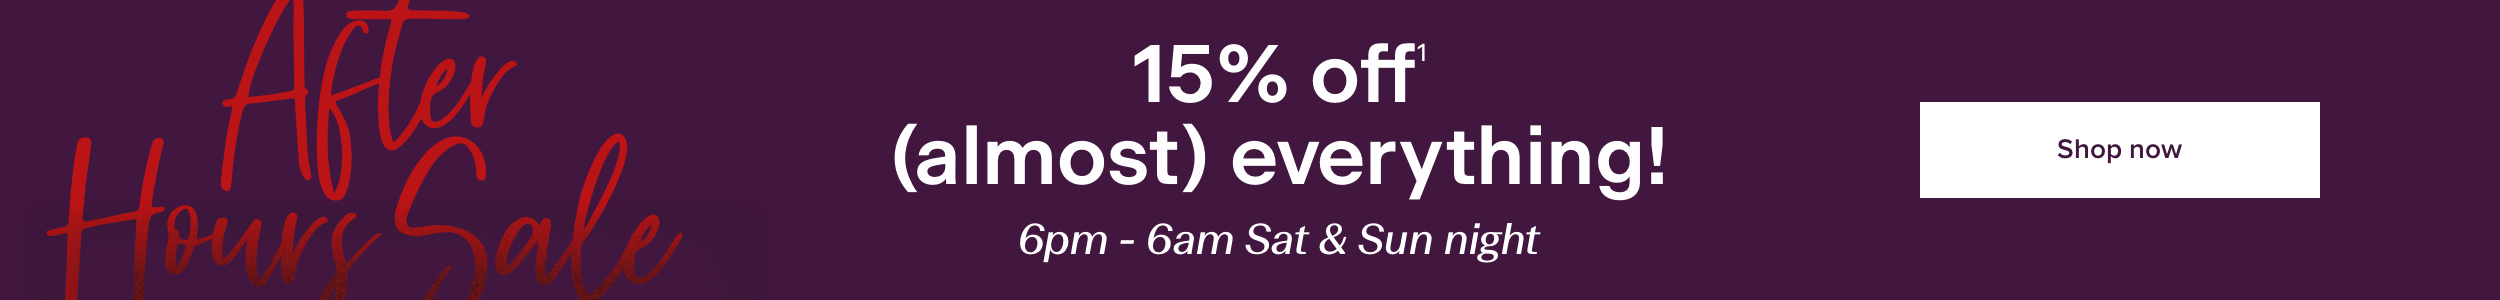 After Hours Sale - 15% off almost everything between 6pm - 6am Saturday and Sunday night. Only at Michael Hill.